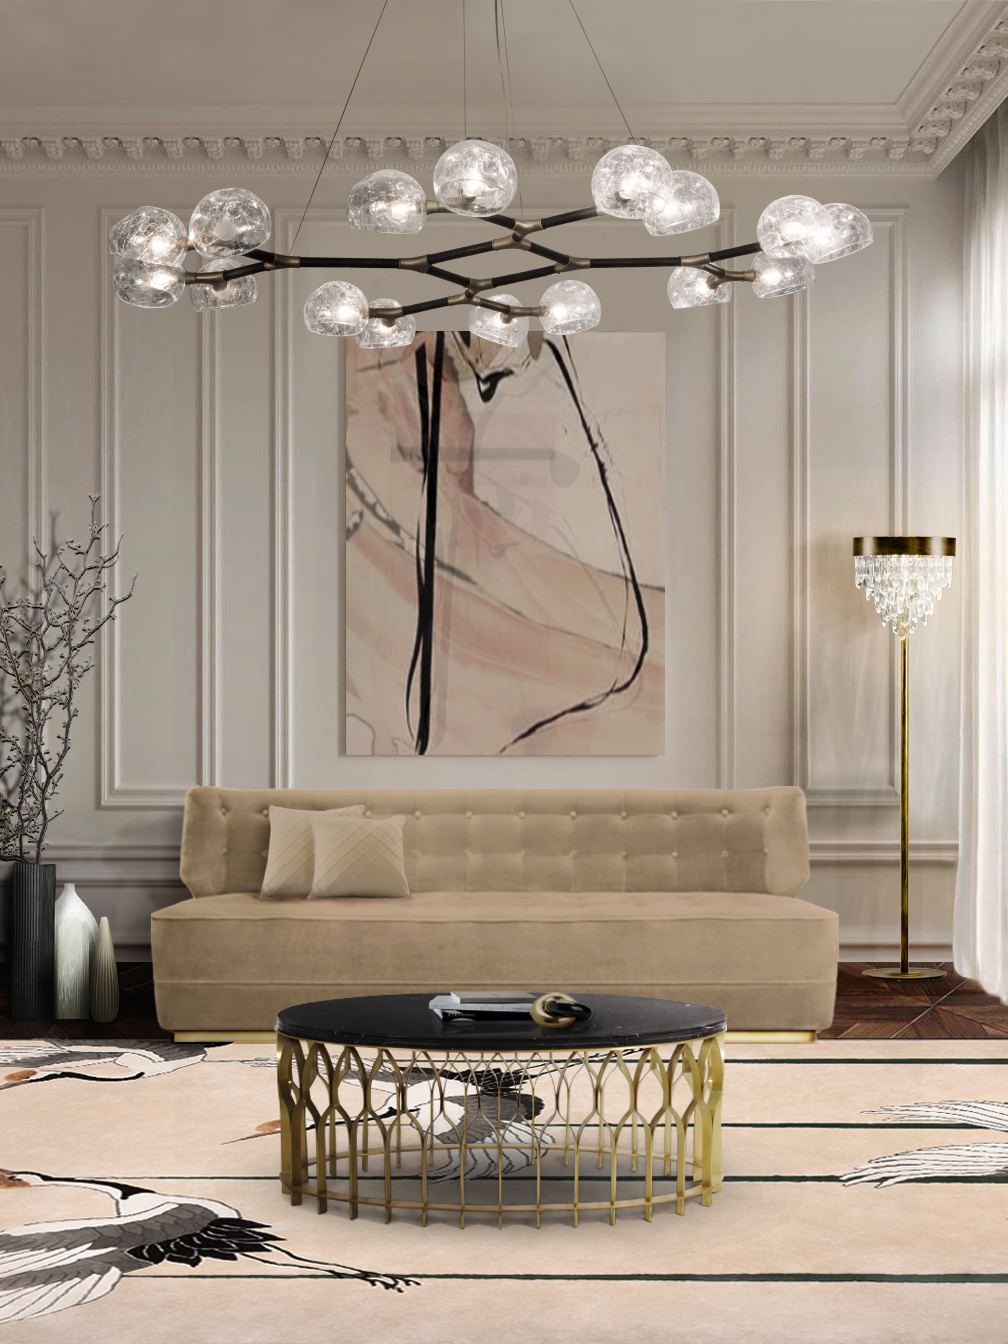 Modern Contemporary Living Room Design with Round Coffee Table, Brass  Floor Light and Velvet Sofa - Home'Society